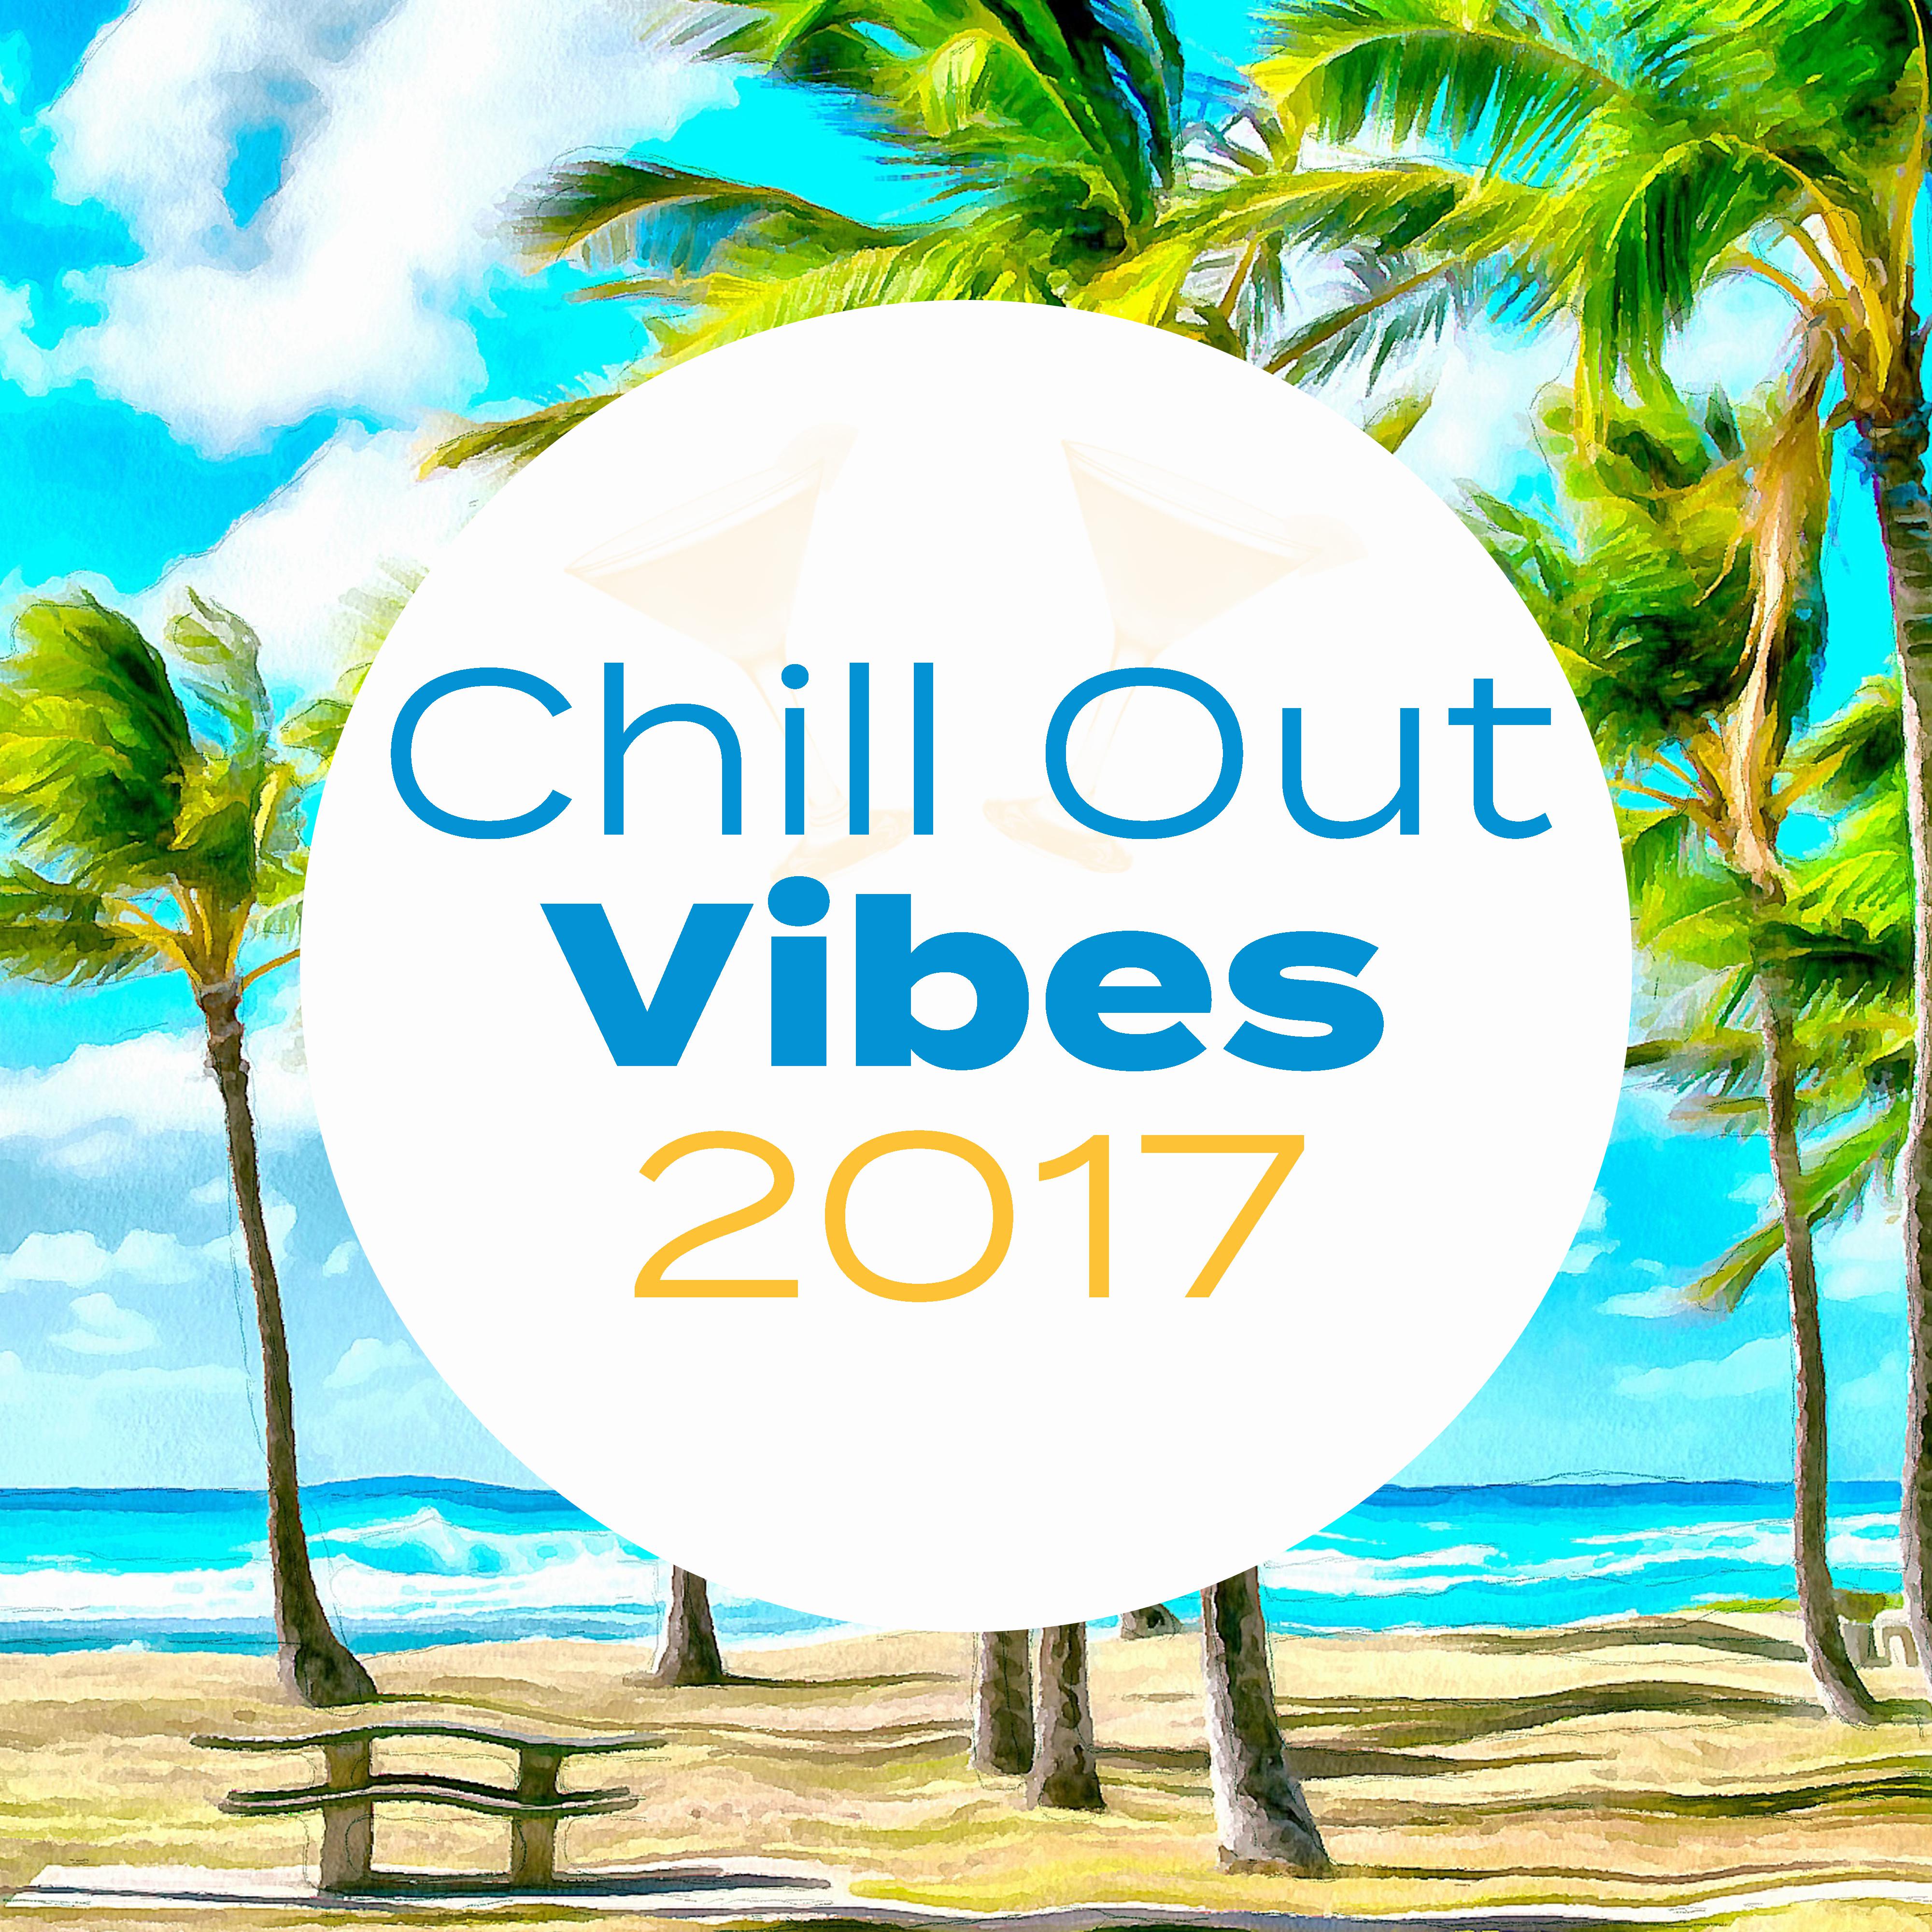 Chill Out Vibes 2017 – Summer Hits, Rest on the Beach, Tropical Sun, Holiday Relaxation